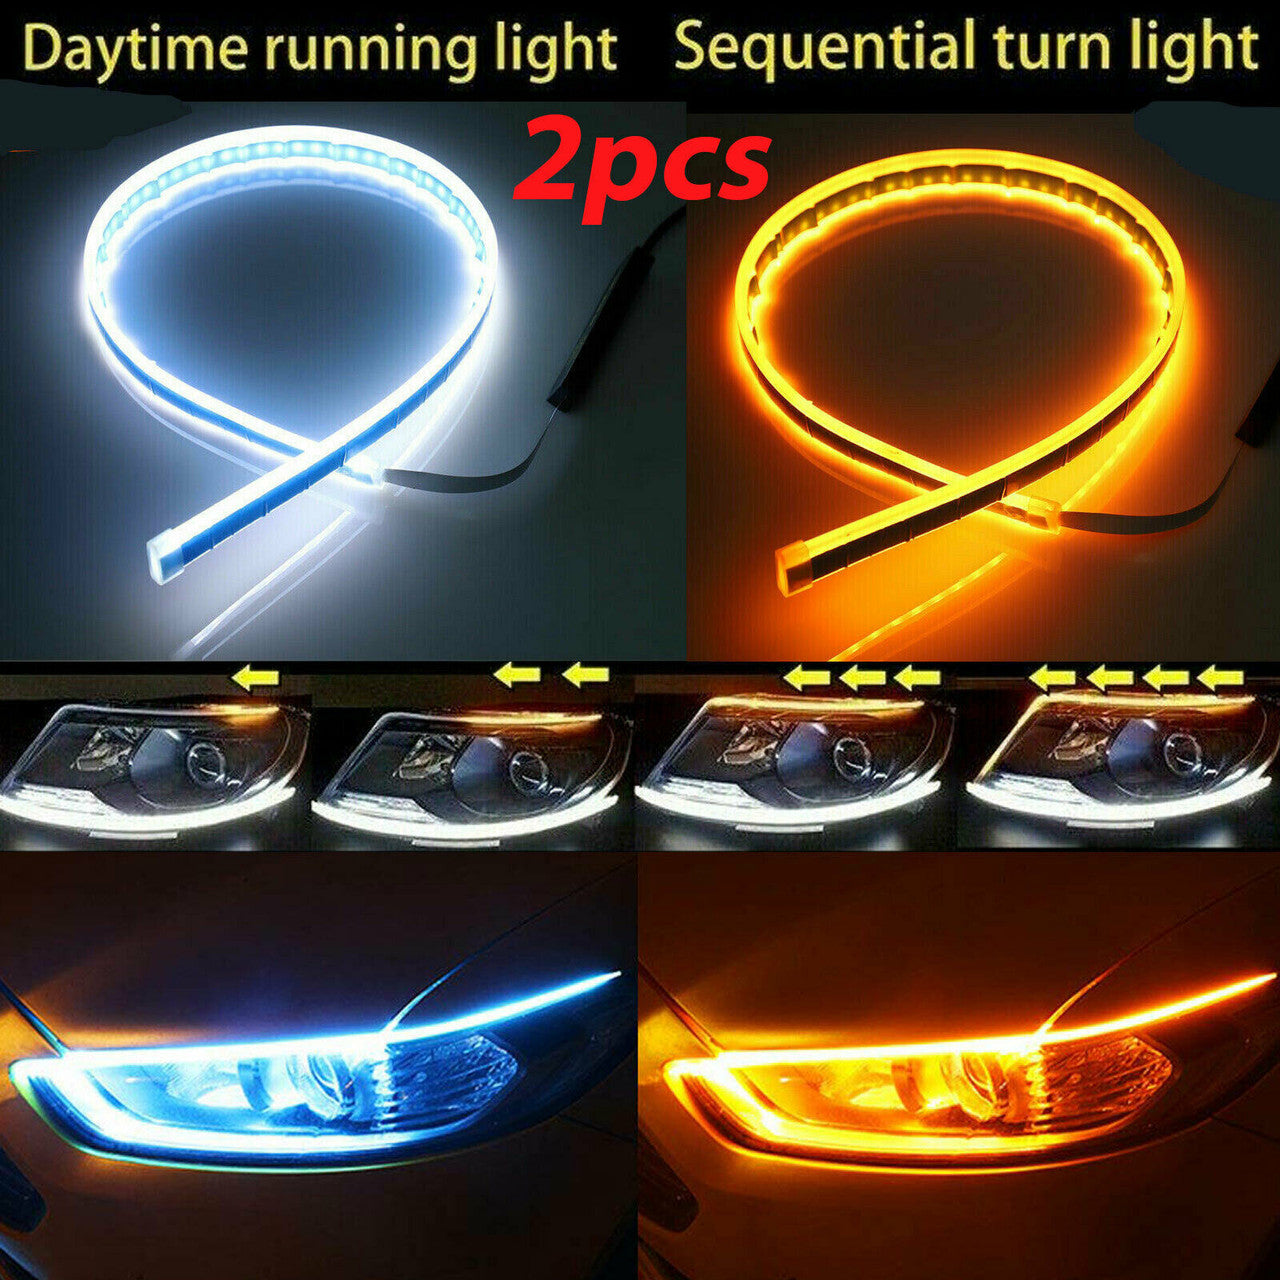 Flexible Led Light Strip 2Pcs 24 Inches Dual Color White-Amber Sequential Switchback DRL LED Kit Waterproof for Car Replacement Switchback Headlight Decorative Lamp Kits and Turn Signal Tube Lights